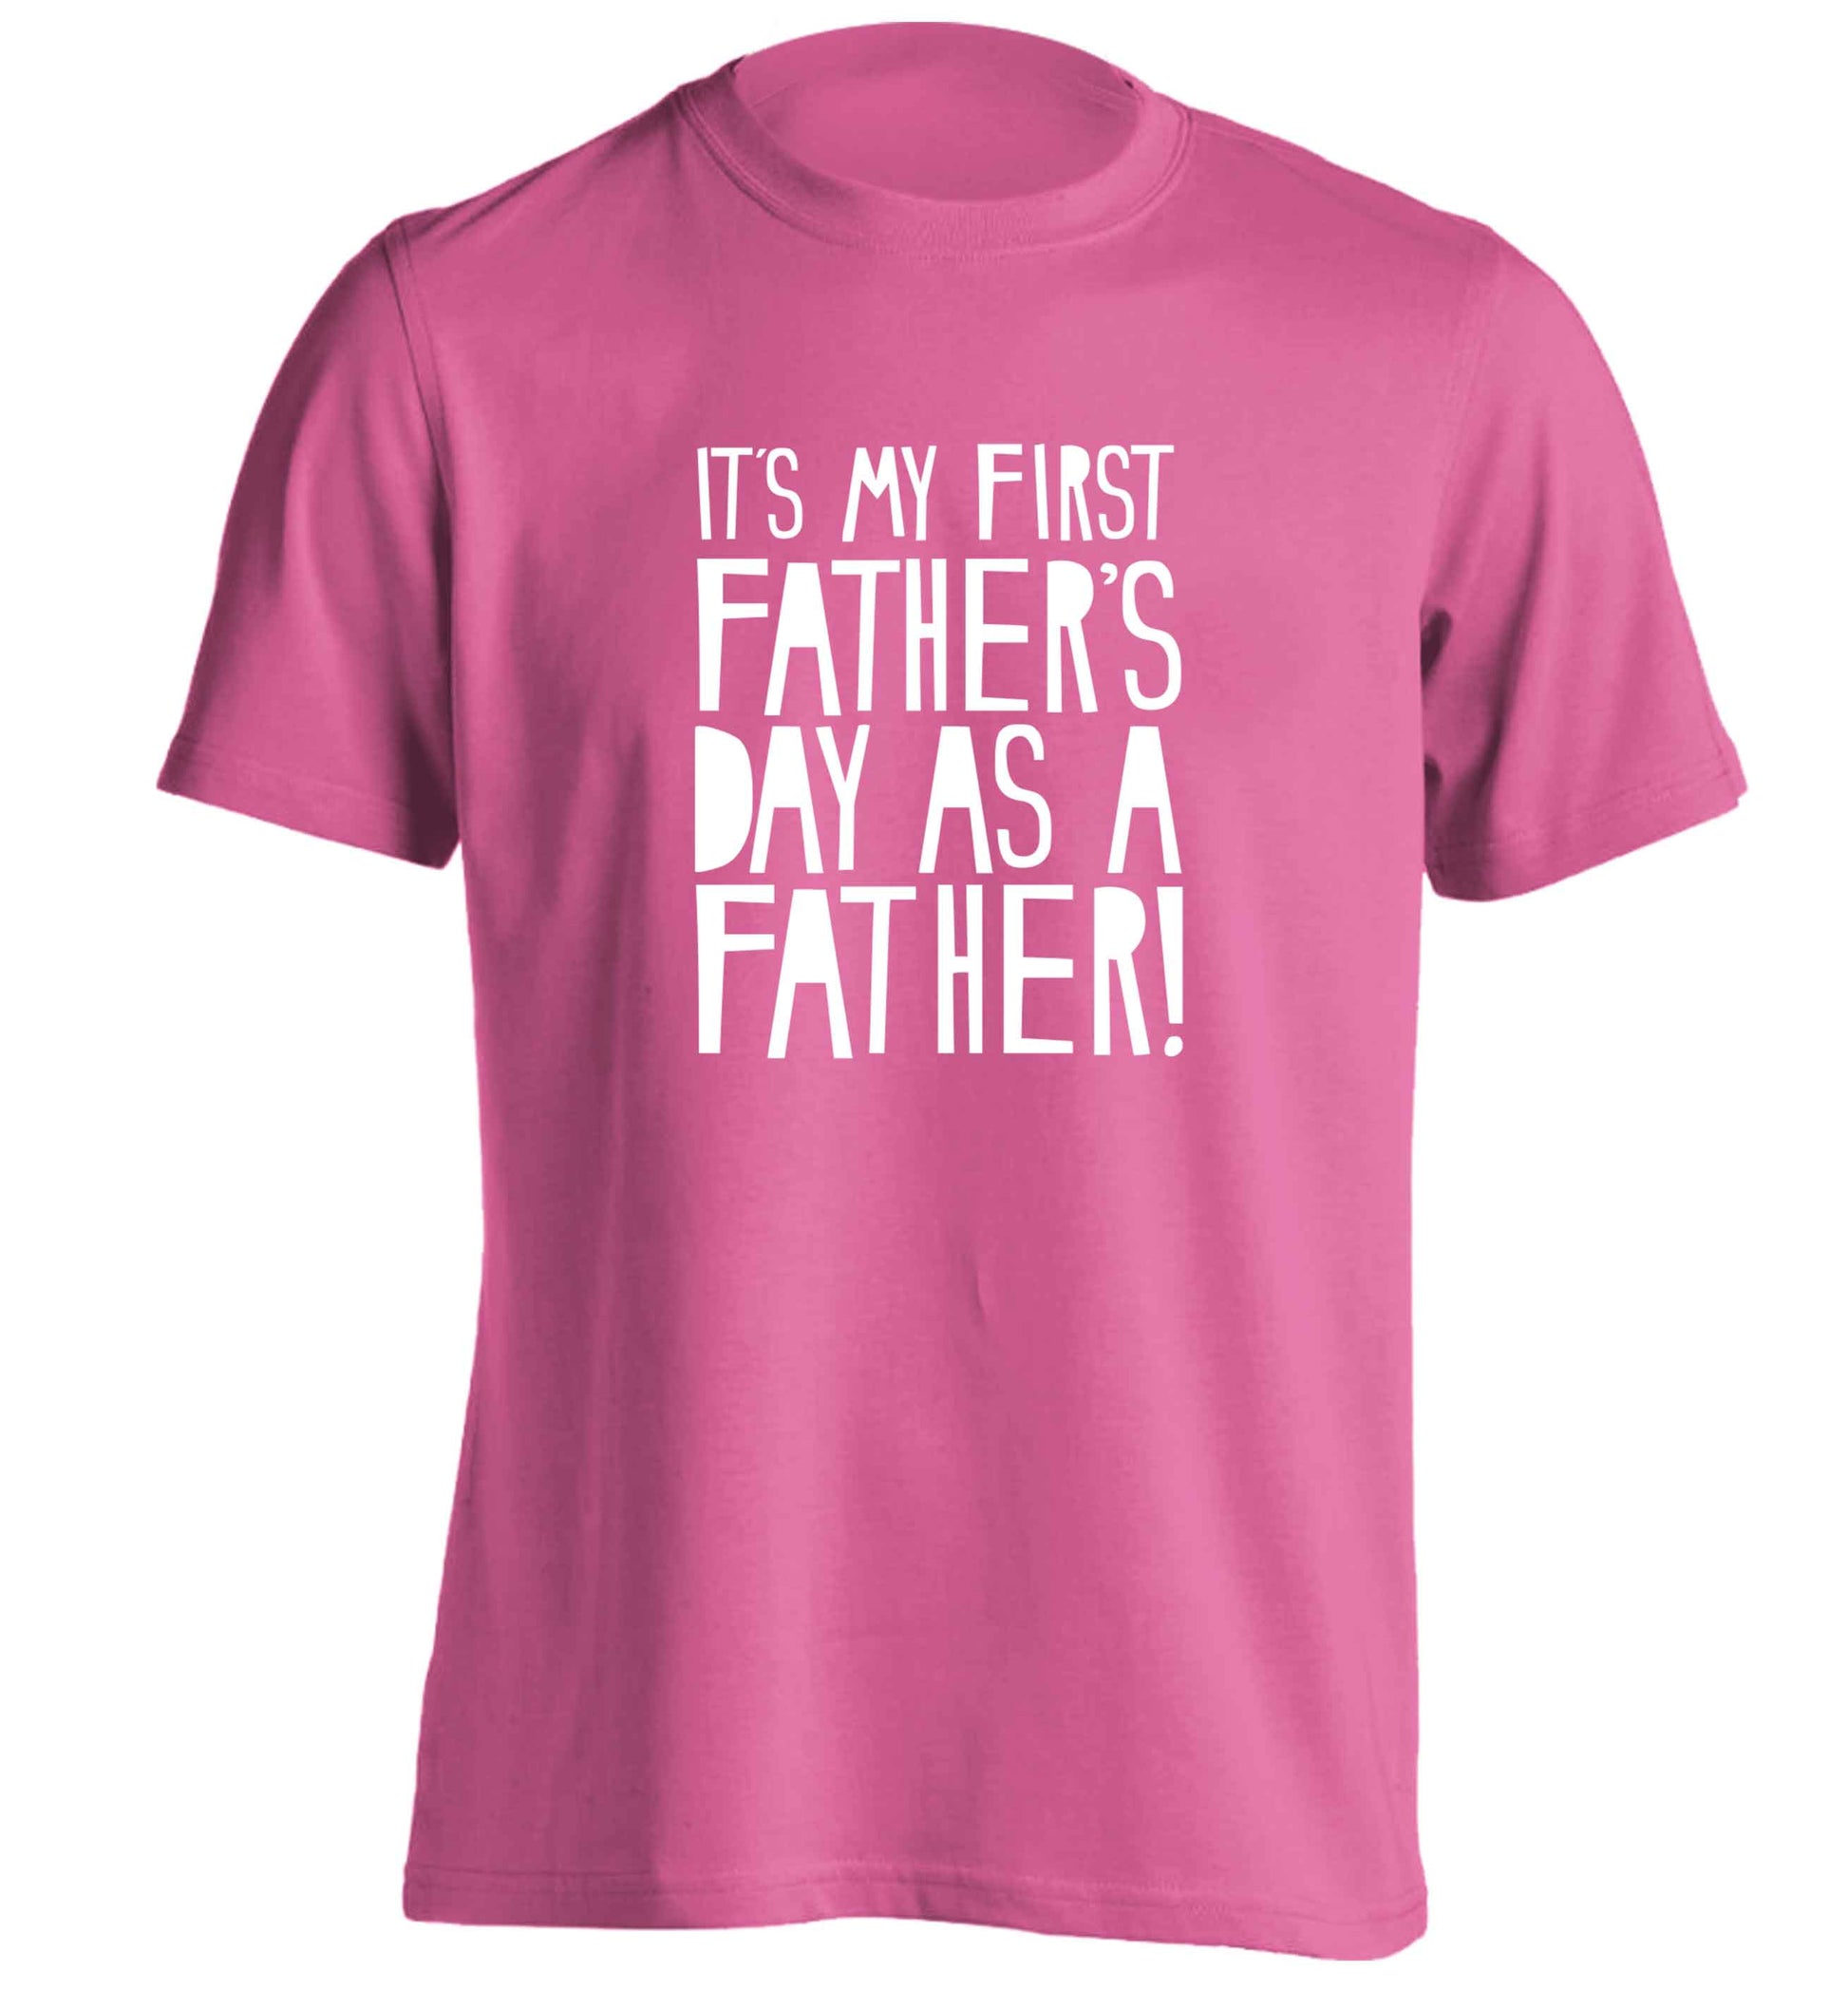 It's my first father's day as a father! adults unisex pink Tshirt 2XL